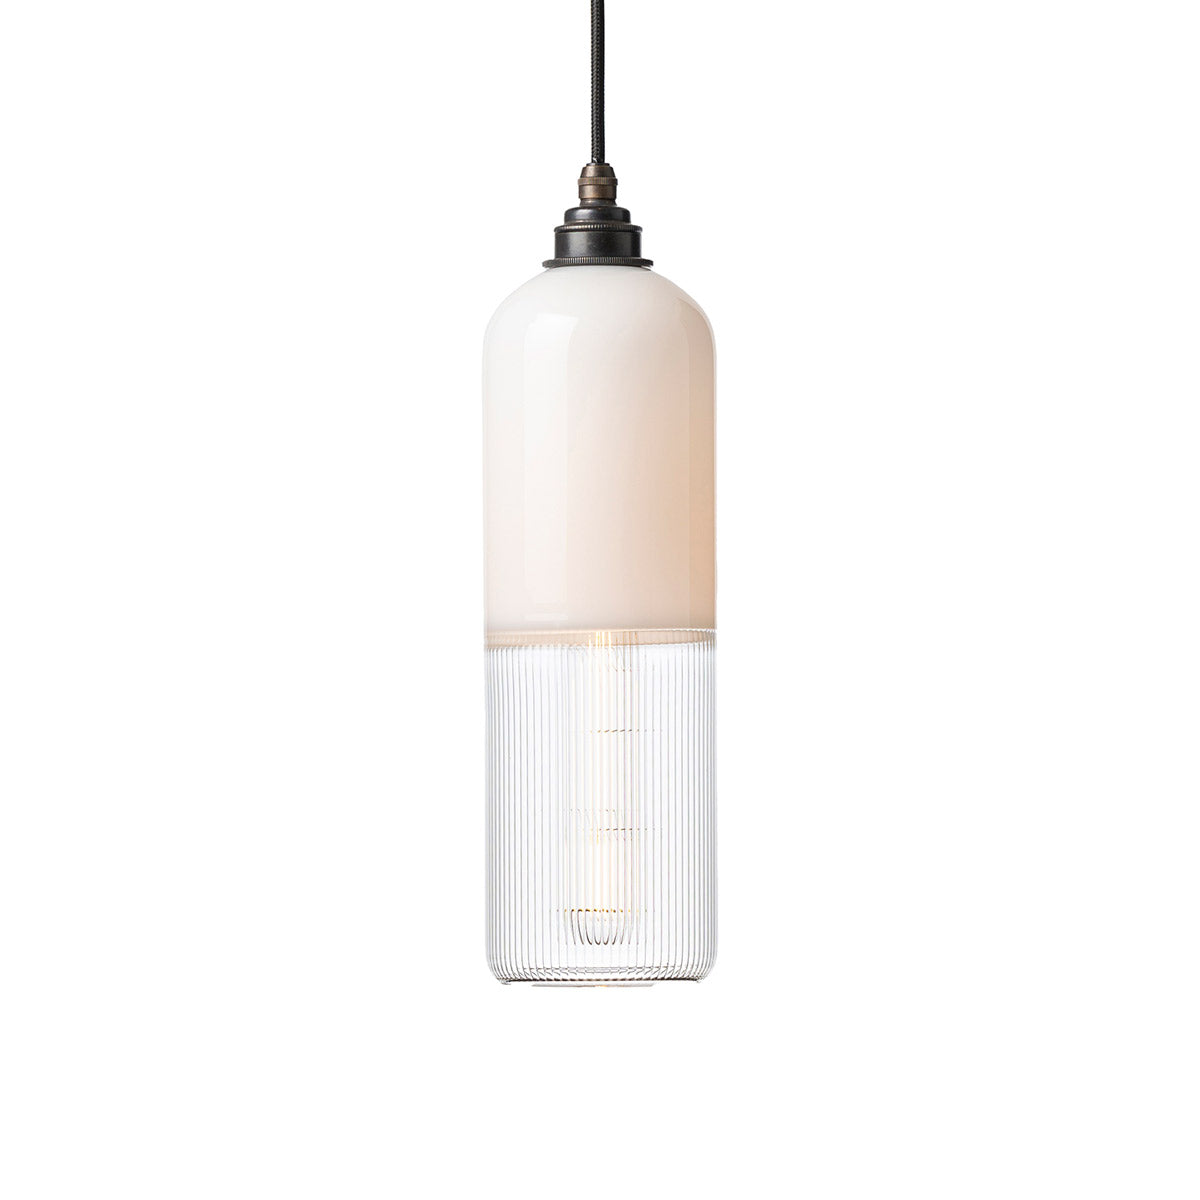 This coloured glass pendant light by Leverint features opaque glass on the top and fine ribbed glass on the bottom and is sold by South Charlotte Fine Lighting